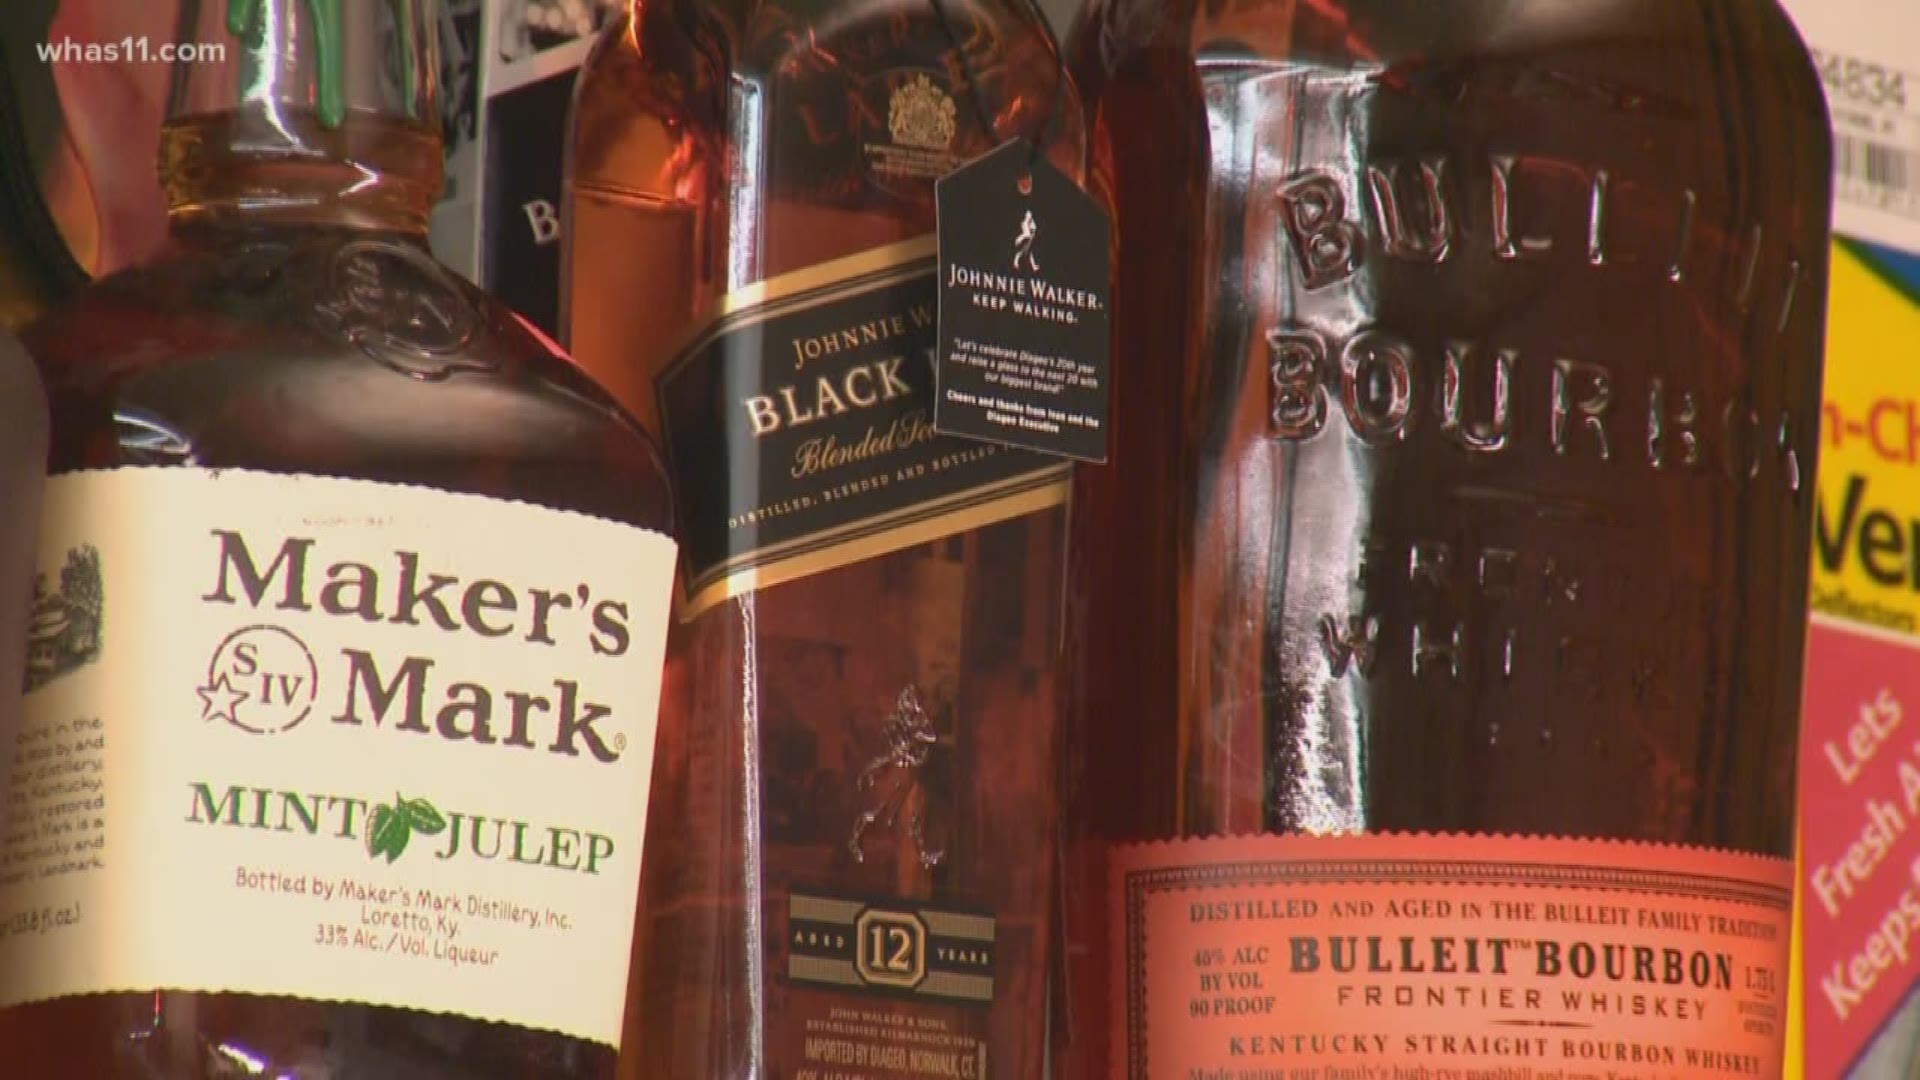 Donna McGraw collects bourbon bottles to help Families for Effective Autism Treatment raise money for programs for children with autism and their entire family.